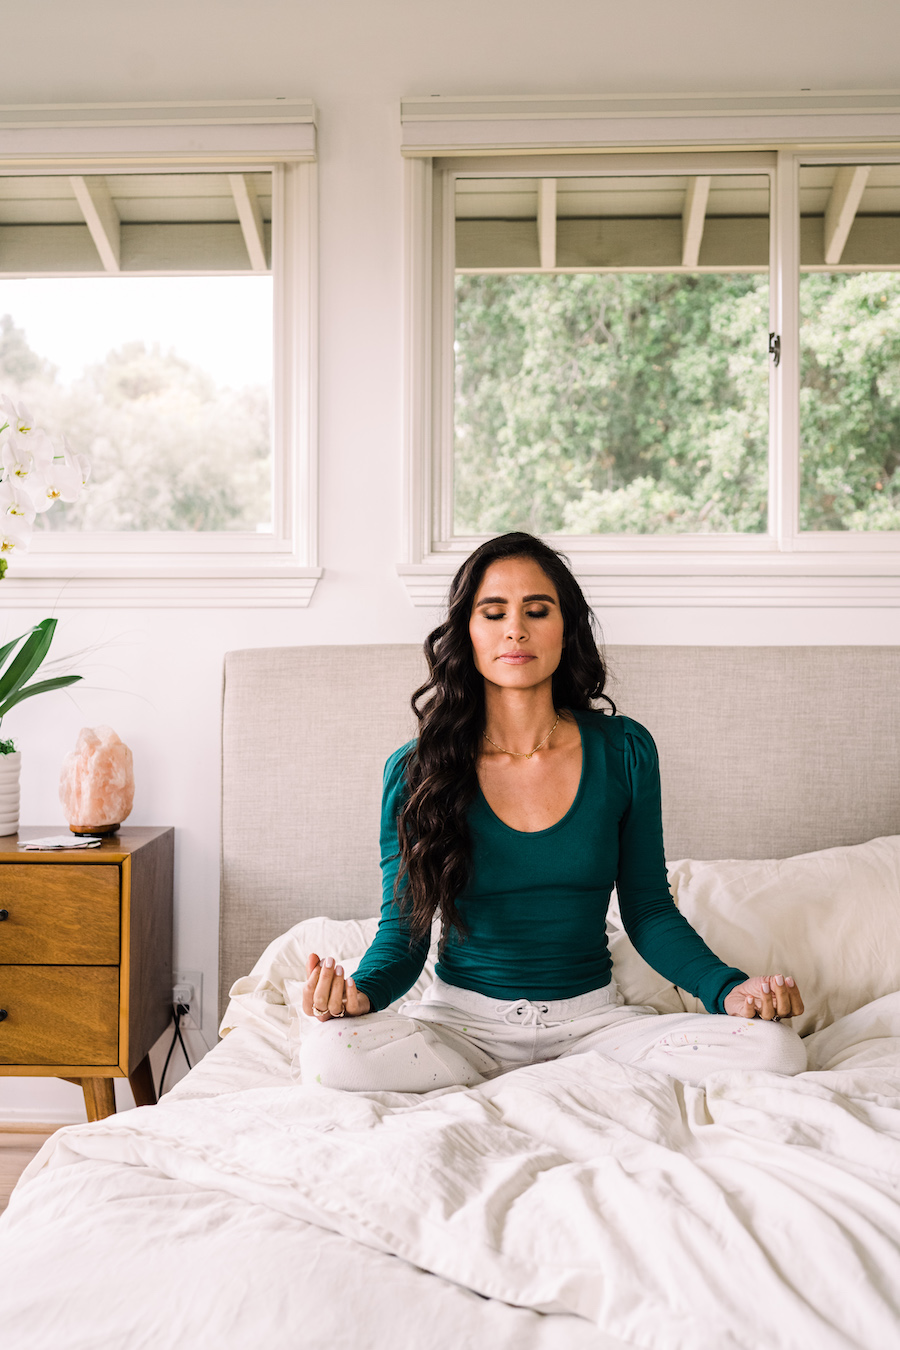 Kimberly Snyder's morning routine, bed, bedroom, relaxing, meditation, wellness-how to take care of your voice